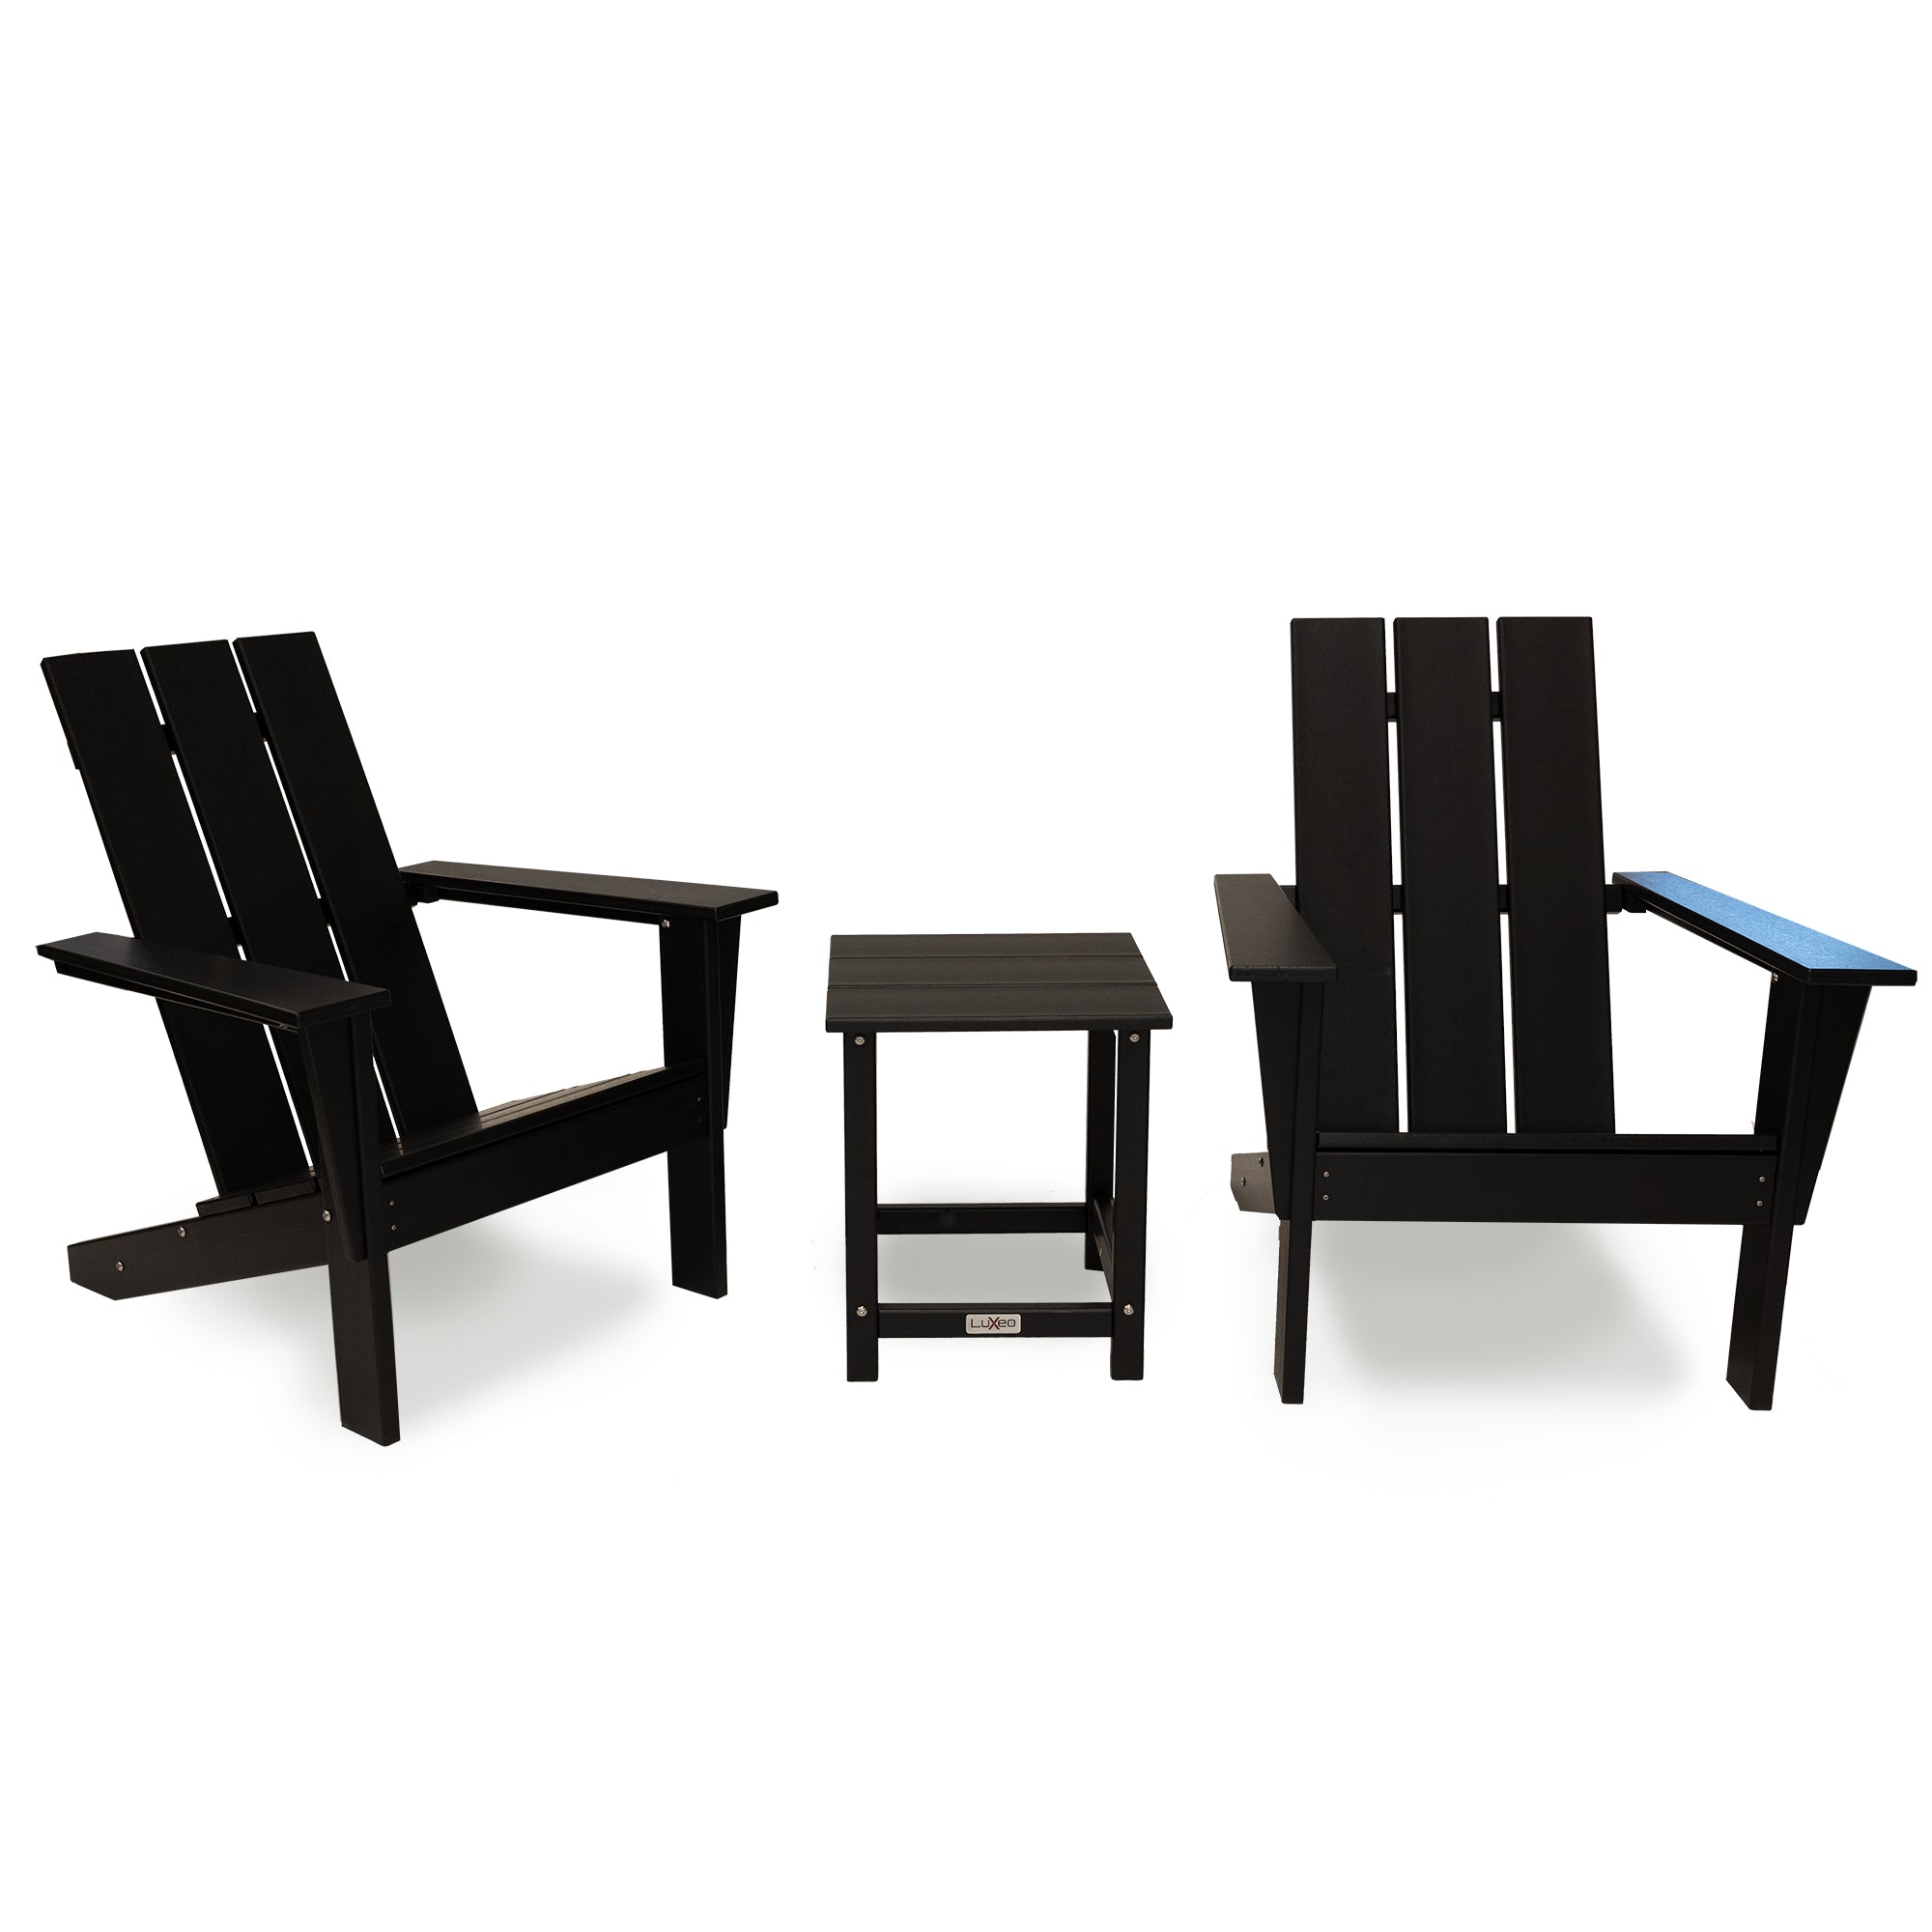 LuXeo Arcadia Outdoor Patio Adirondack Chair and Table Set (3-Piece)